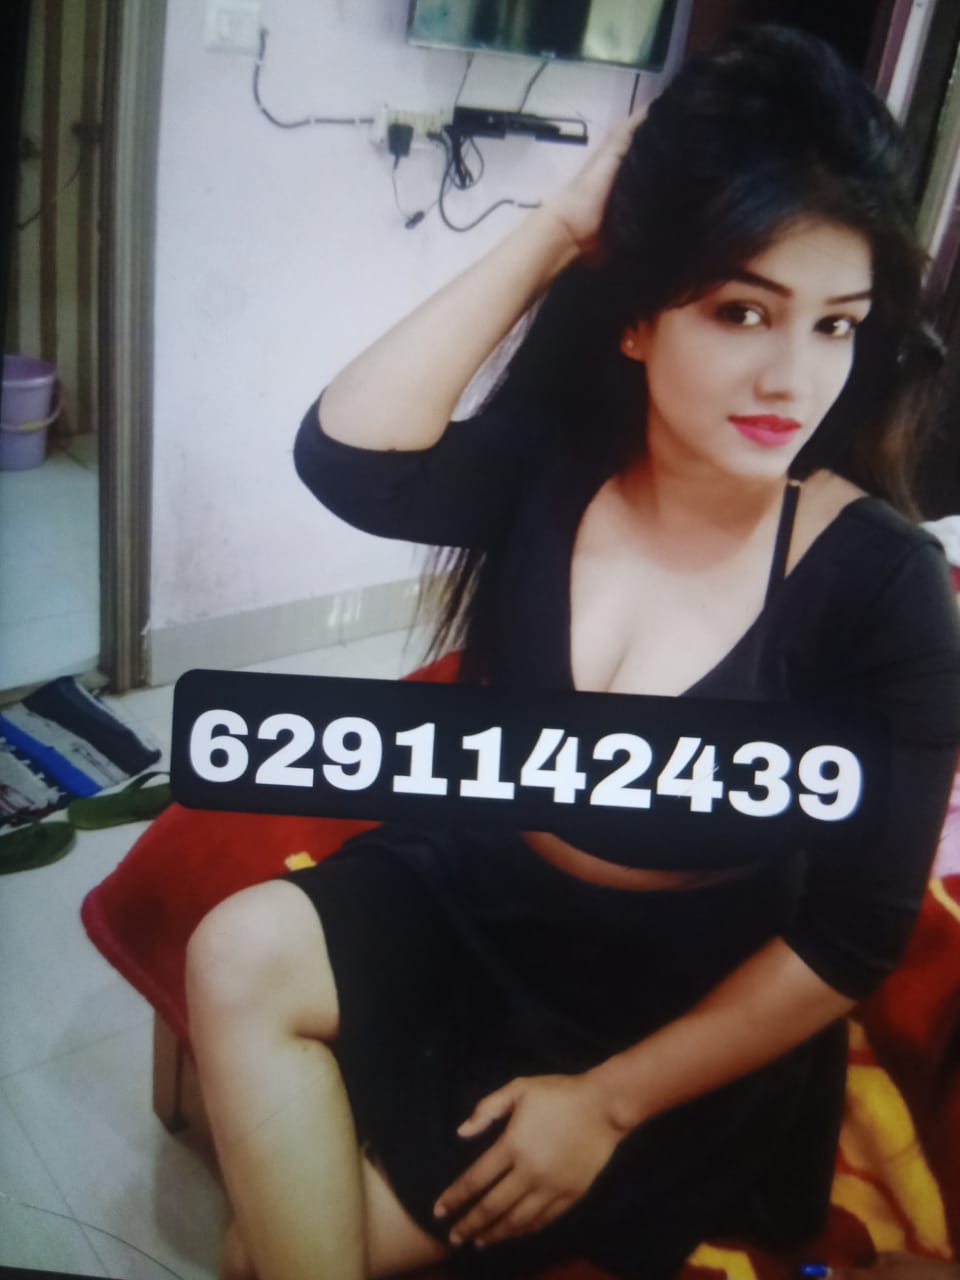 V top model college girl service available here for you royal family